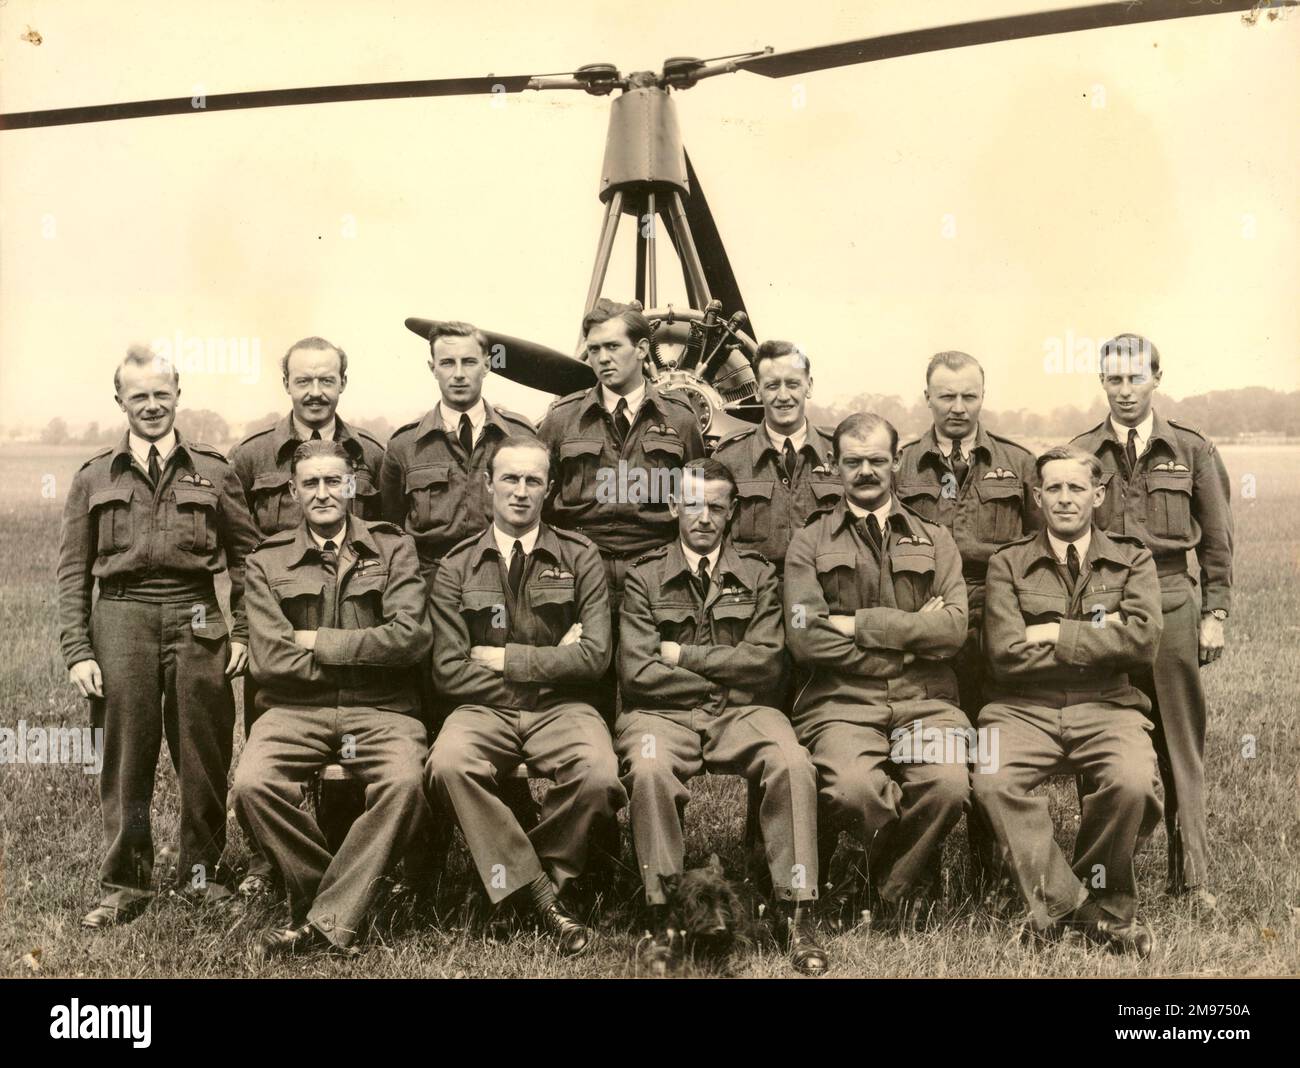 529 Squadron at RAF Halton. circa 1943. Standing: F/O Jimmy Harper, F/O Norman Hill, F/O George ‘Henry’ Ford, F/O John Dennis, F/O not identified, F/O Jack Follis and F/O Major (Kiwi) Eade. Seated: Flt Lt Tommy Walsh, Flt Lt Guy Turner, Sqn Ldr Alan Marsh, AFC (CO), Flt Lt Maurice Houdret and F/O Willie Dunn (Eng Off). Personnel identified on 5 July 2007 by Sqn Ldr Basil Arkell, RAF (Retd), the last known surviving pilot from No 529 Squadron. The photo was taken just prior to Basil joining the squadron. Stock Photo